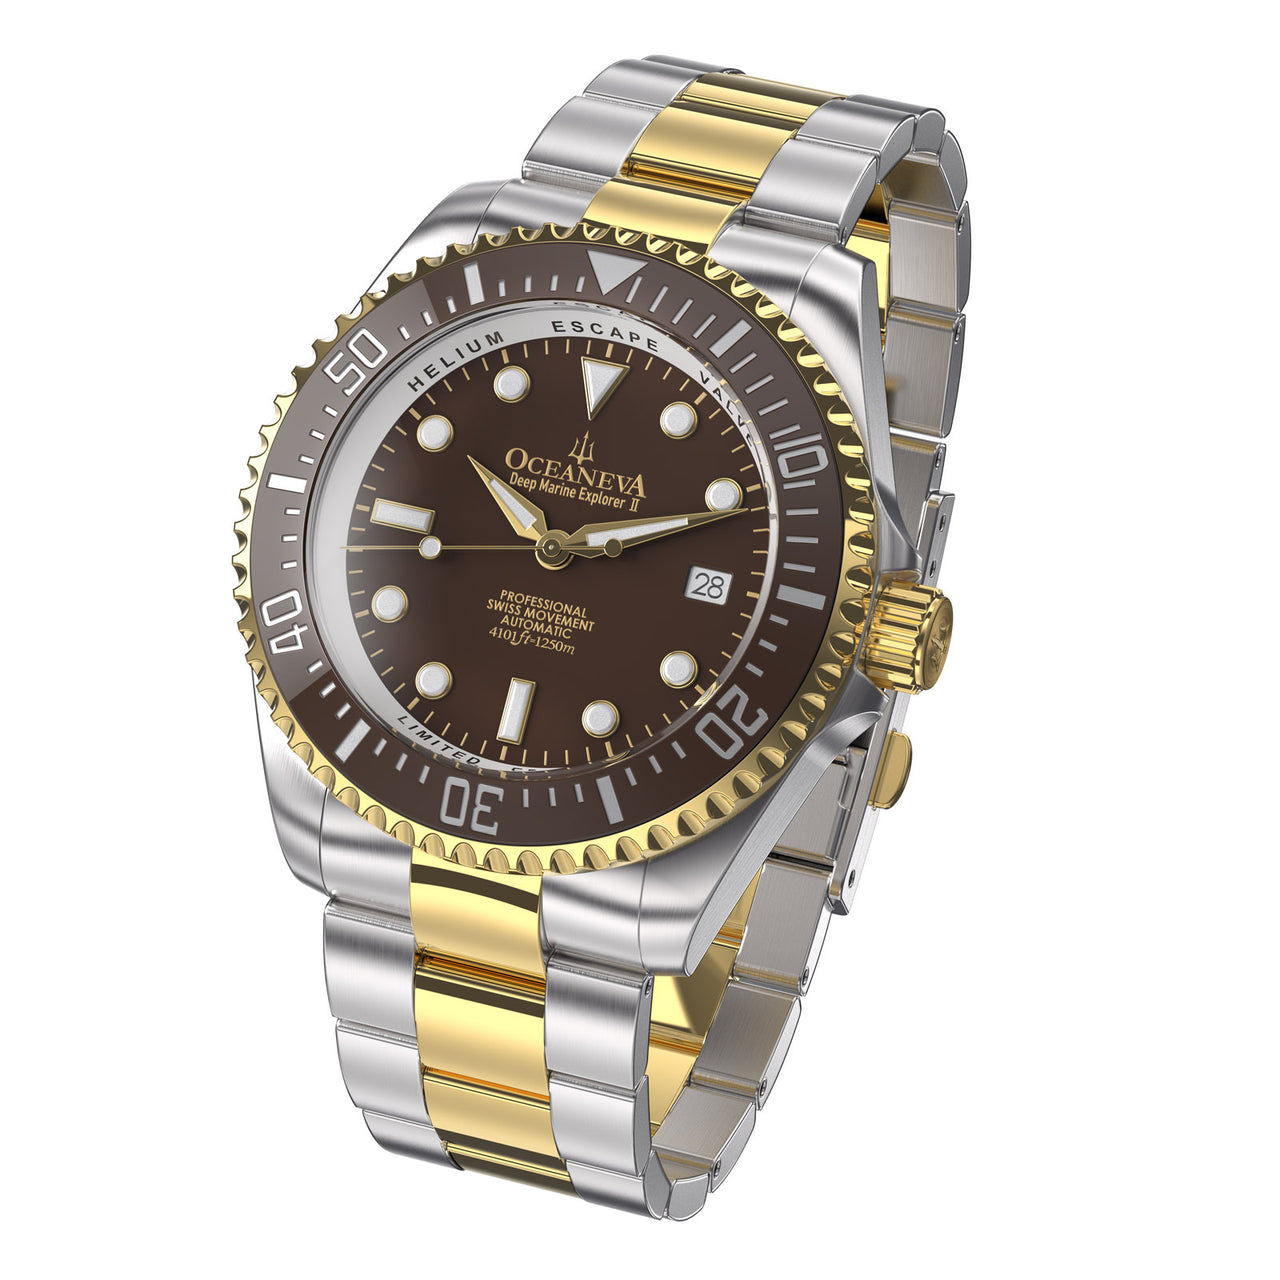 Oceaneva 1250M Dive Watch Brown And Gold Front Picture Slight Left Slant View